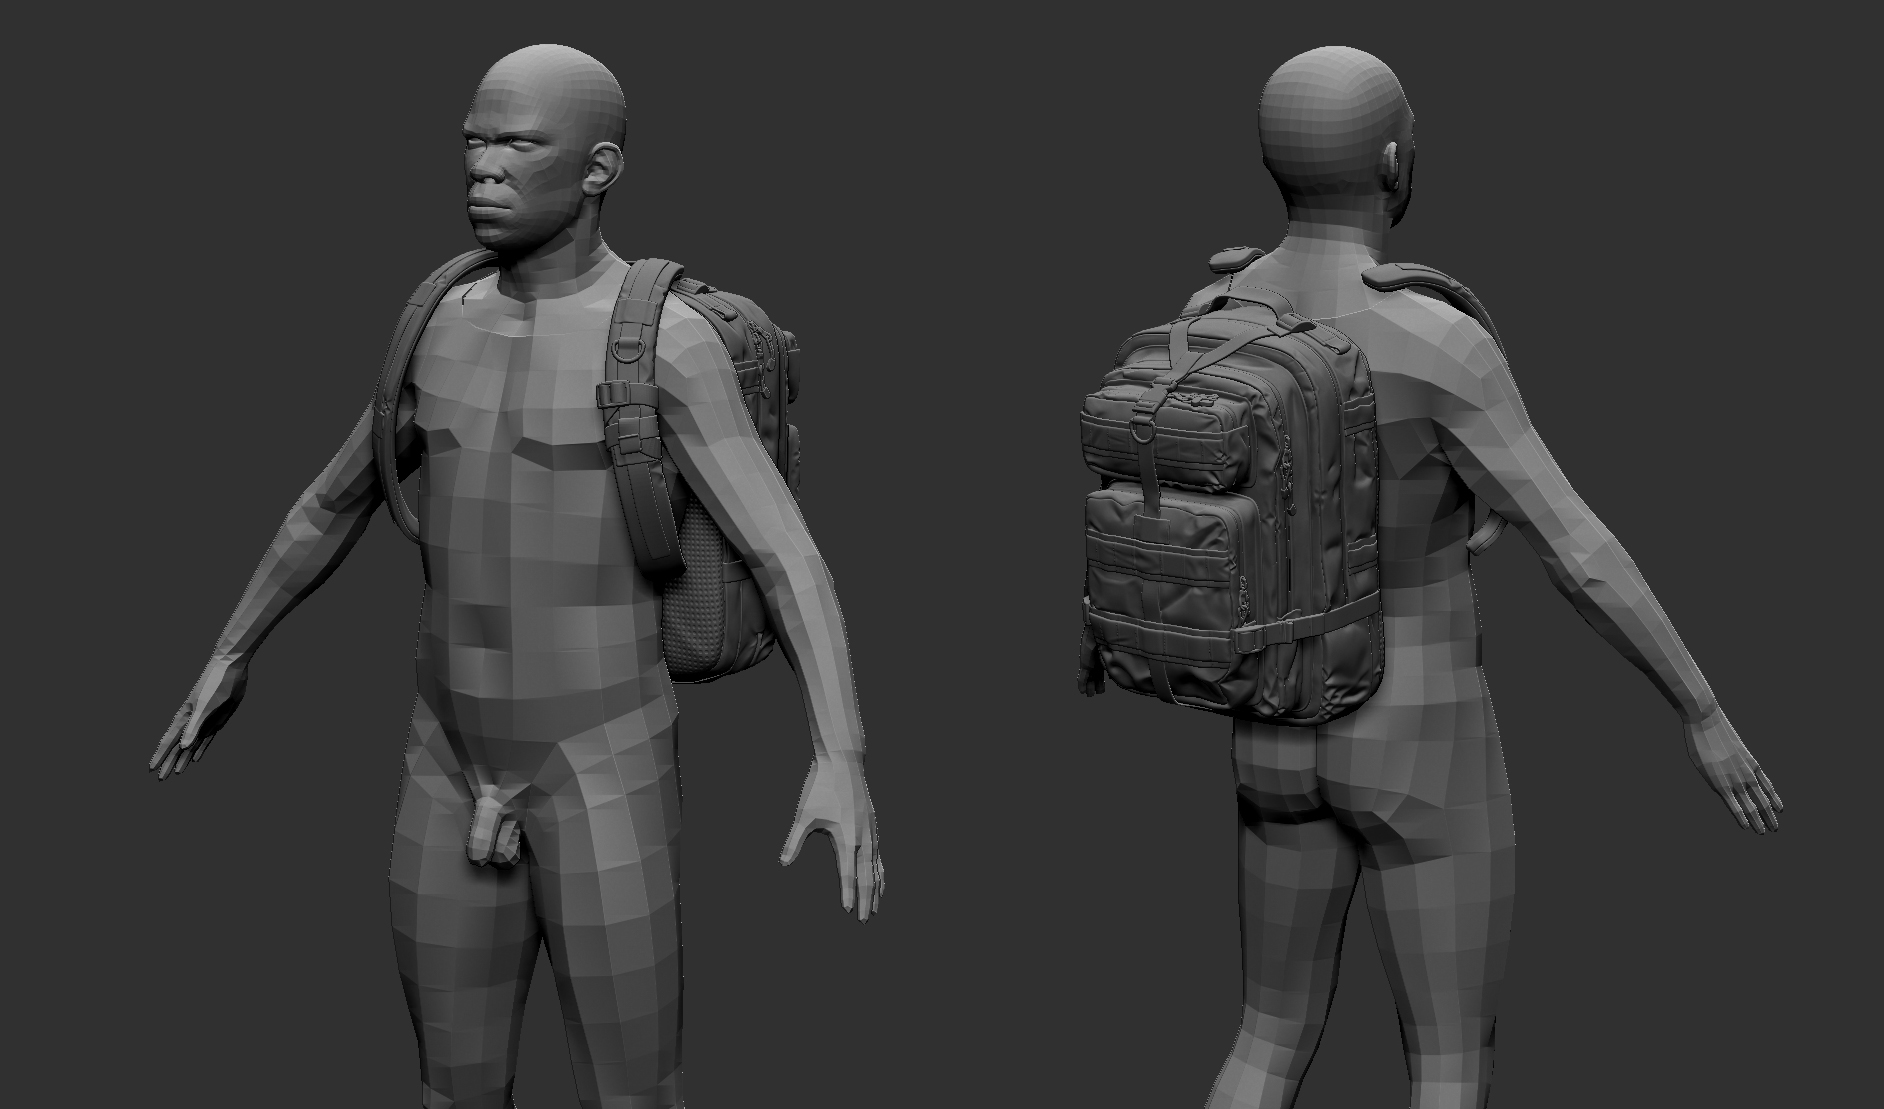 After the 'base' for the high poly is done, I'm going to rou...